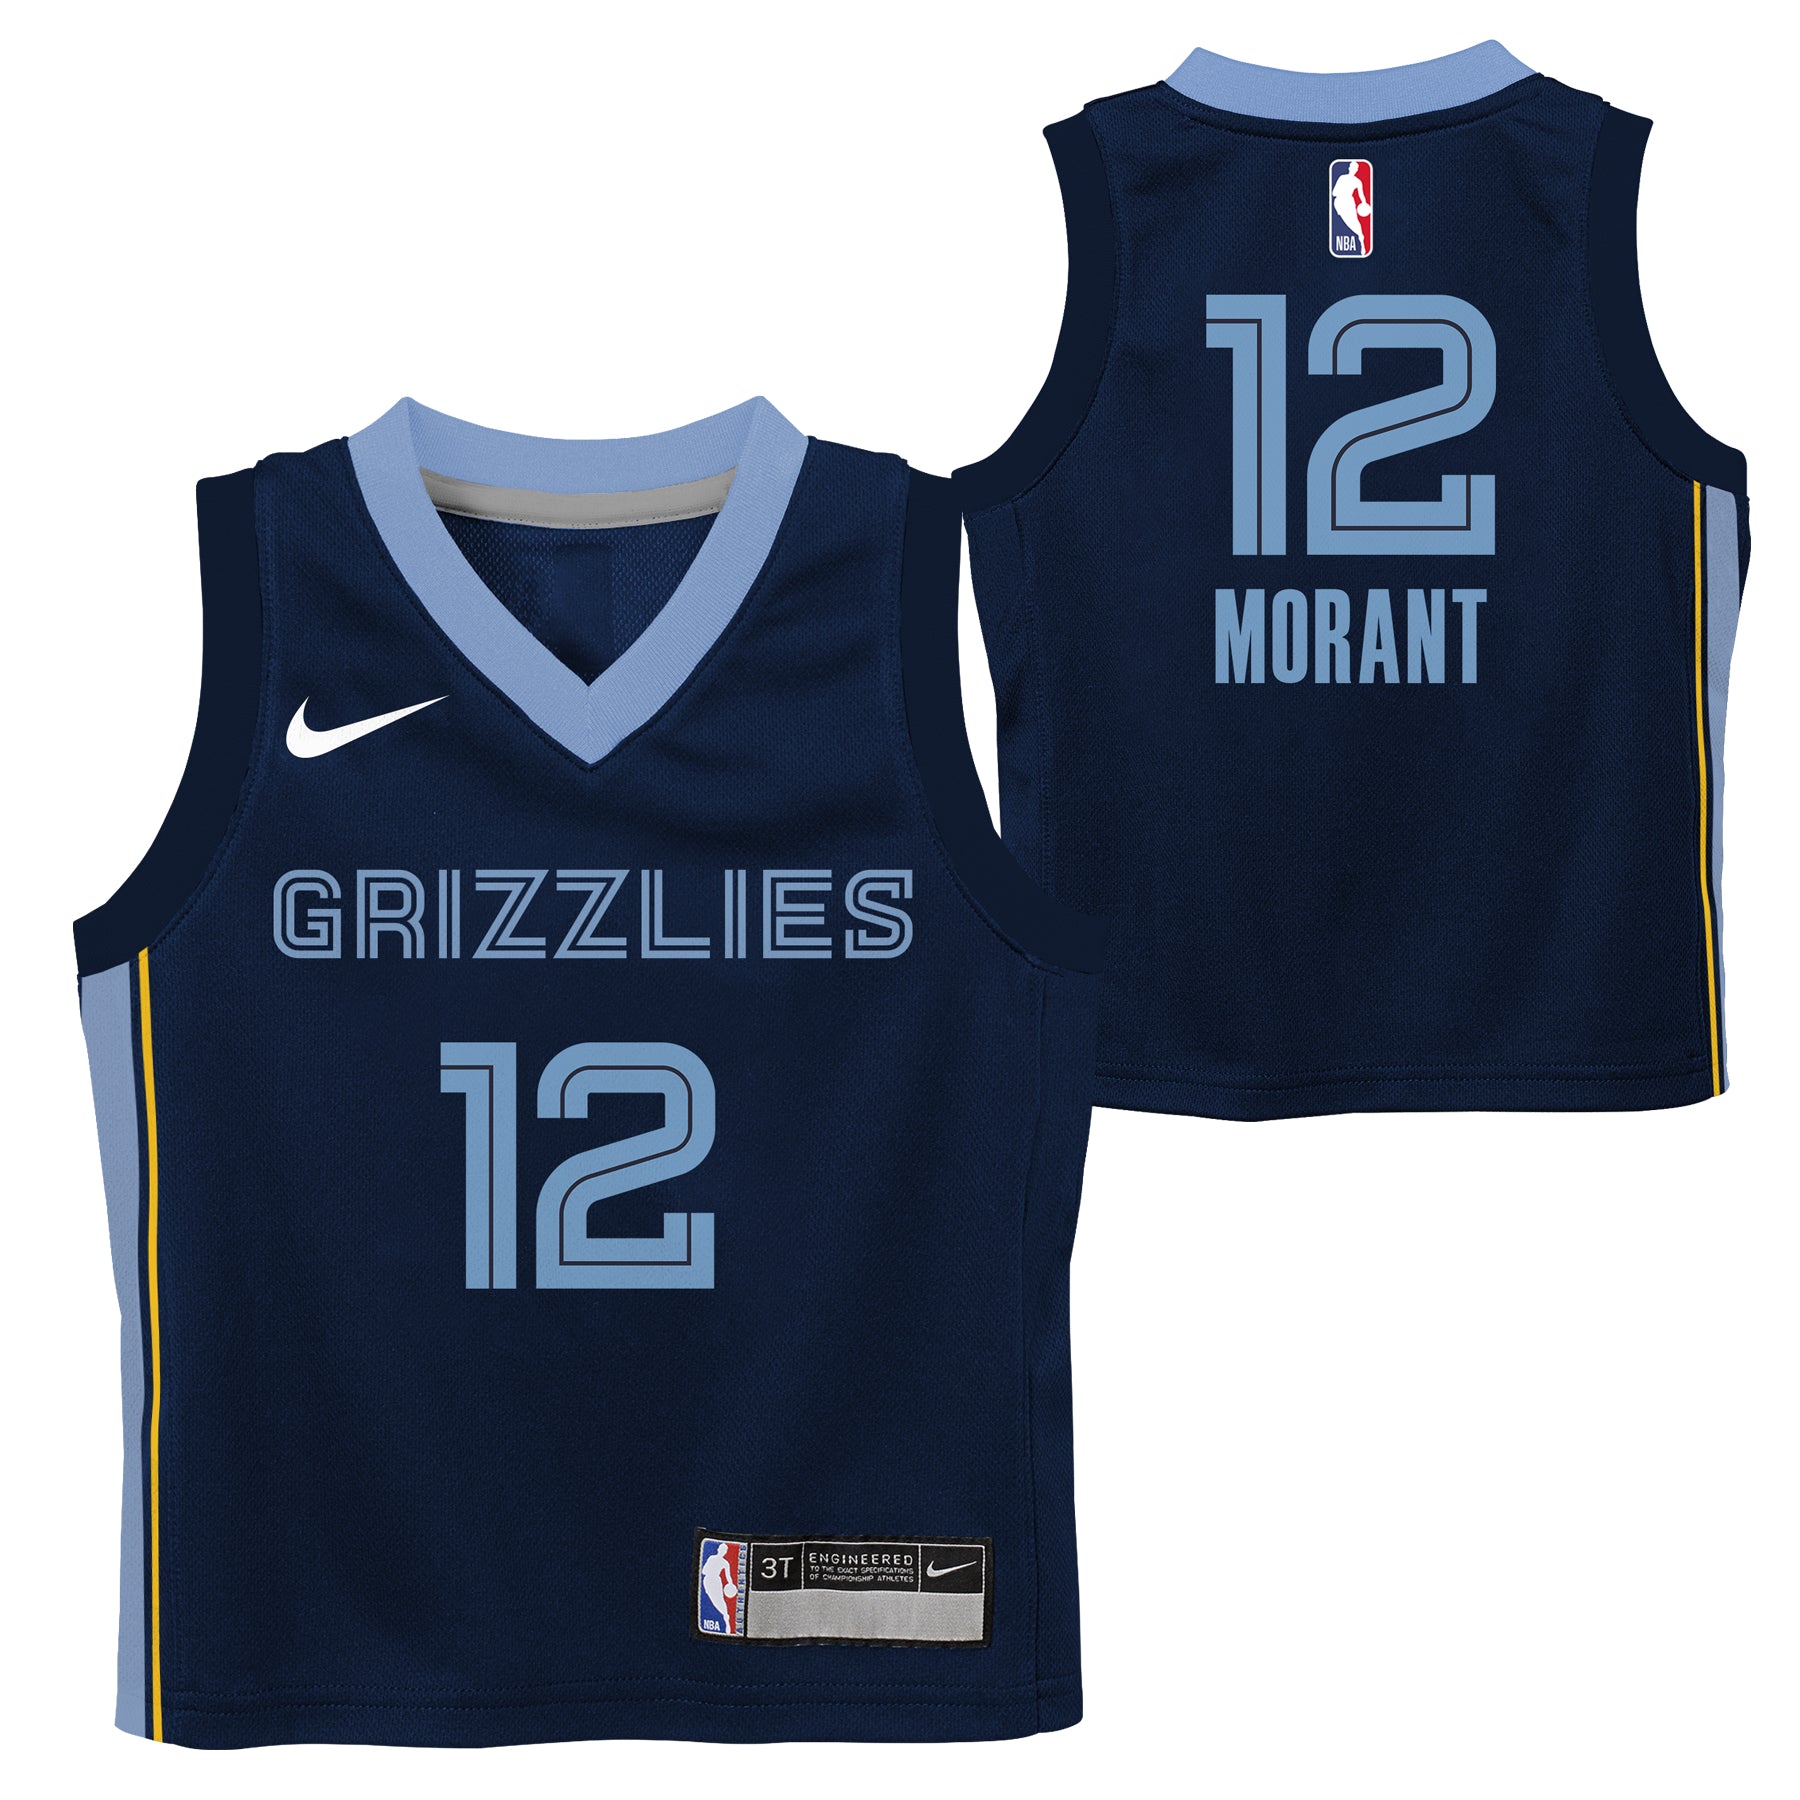 Ja Morant and 'icy' Grizzlies get uniforms to match - Memphis